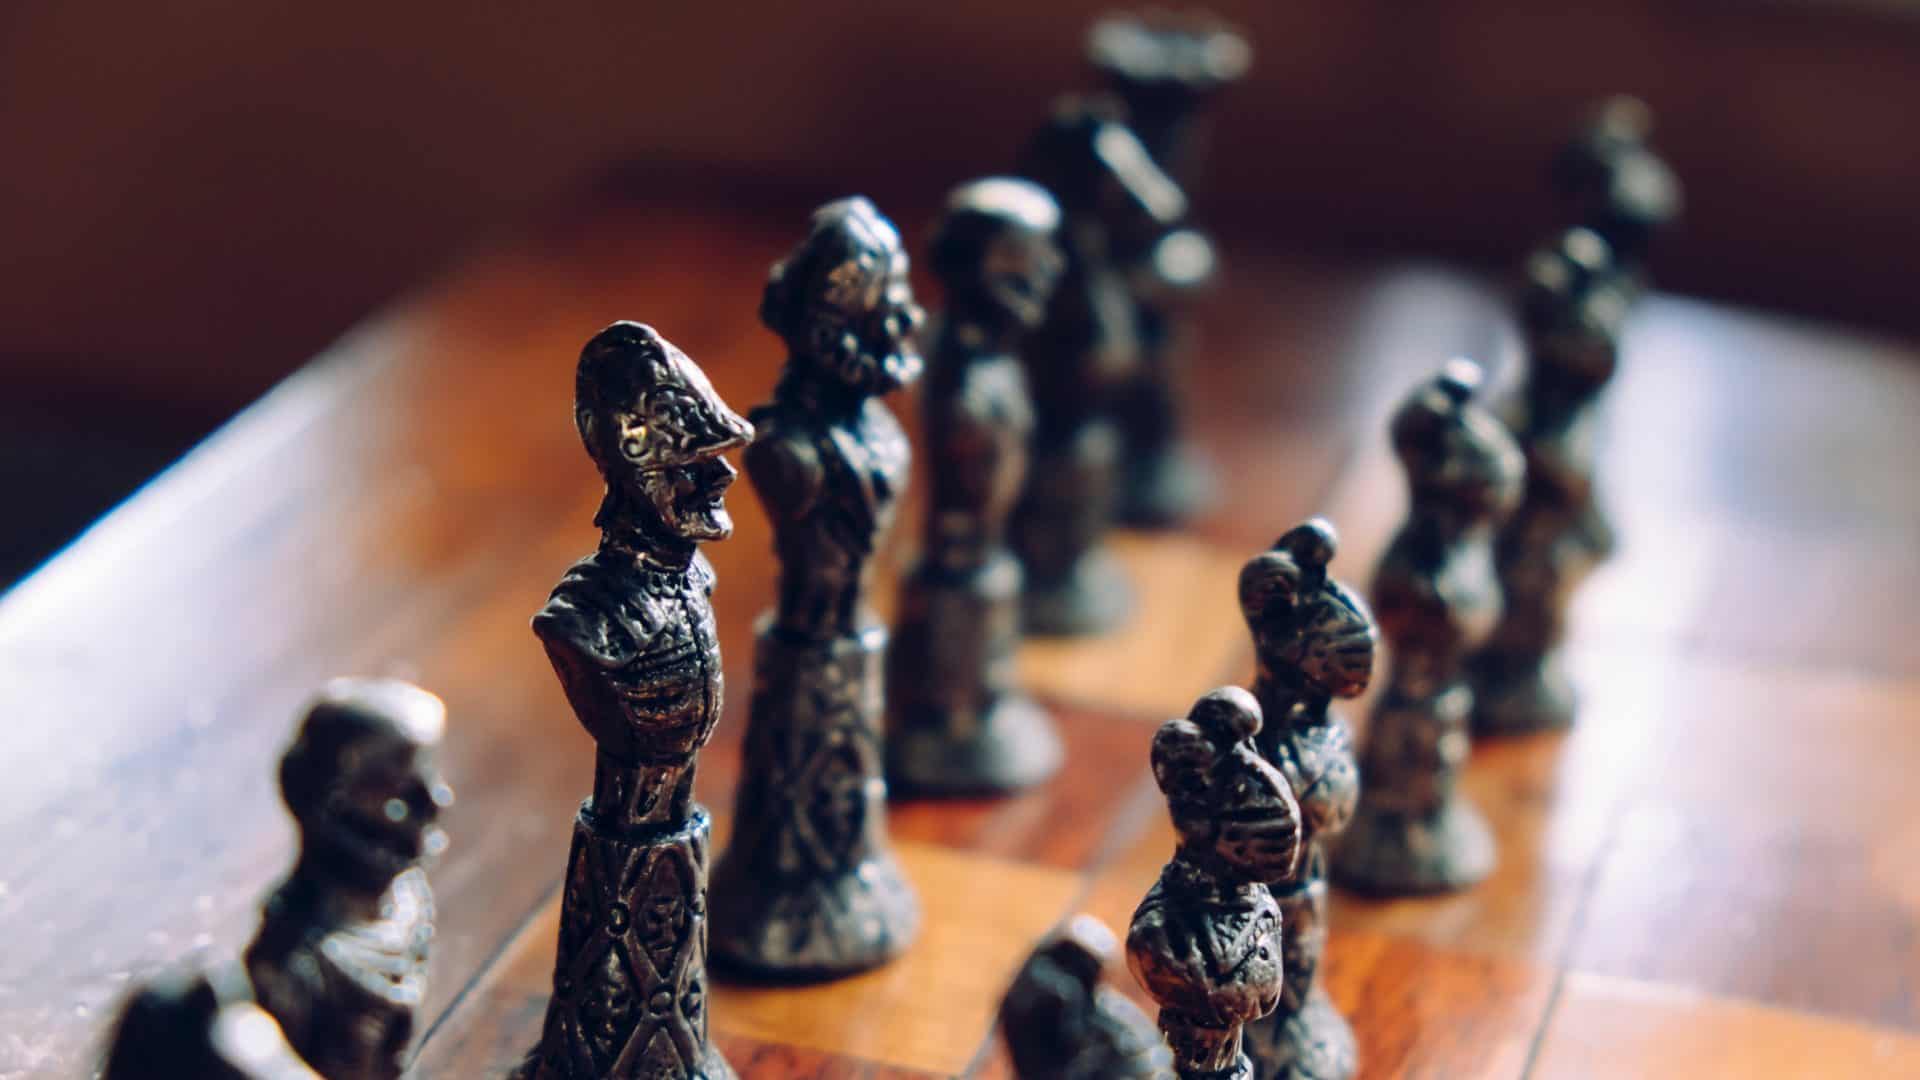 Chess Pieces 101: Names, Moves, and Value - The School Of Rook